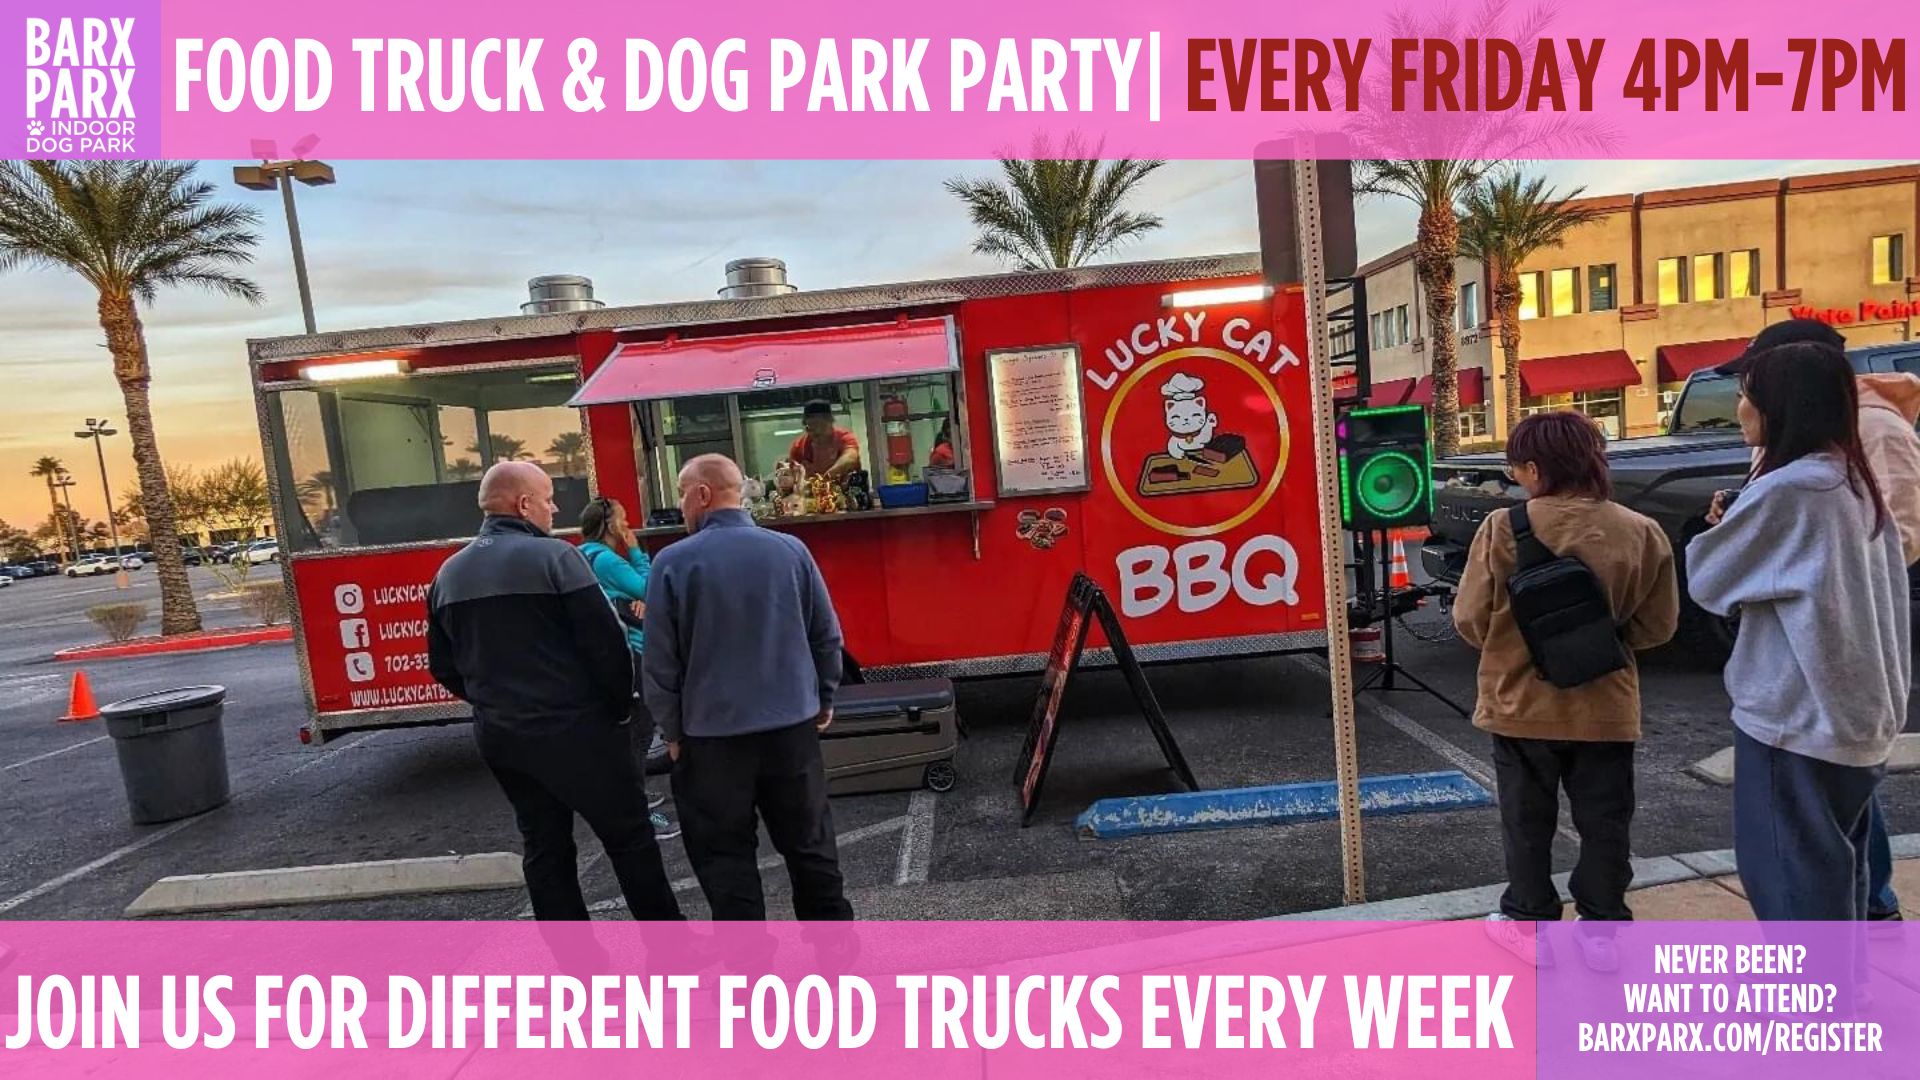 Food truck dog park party